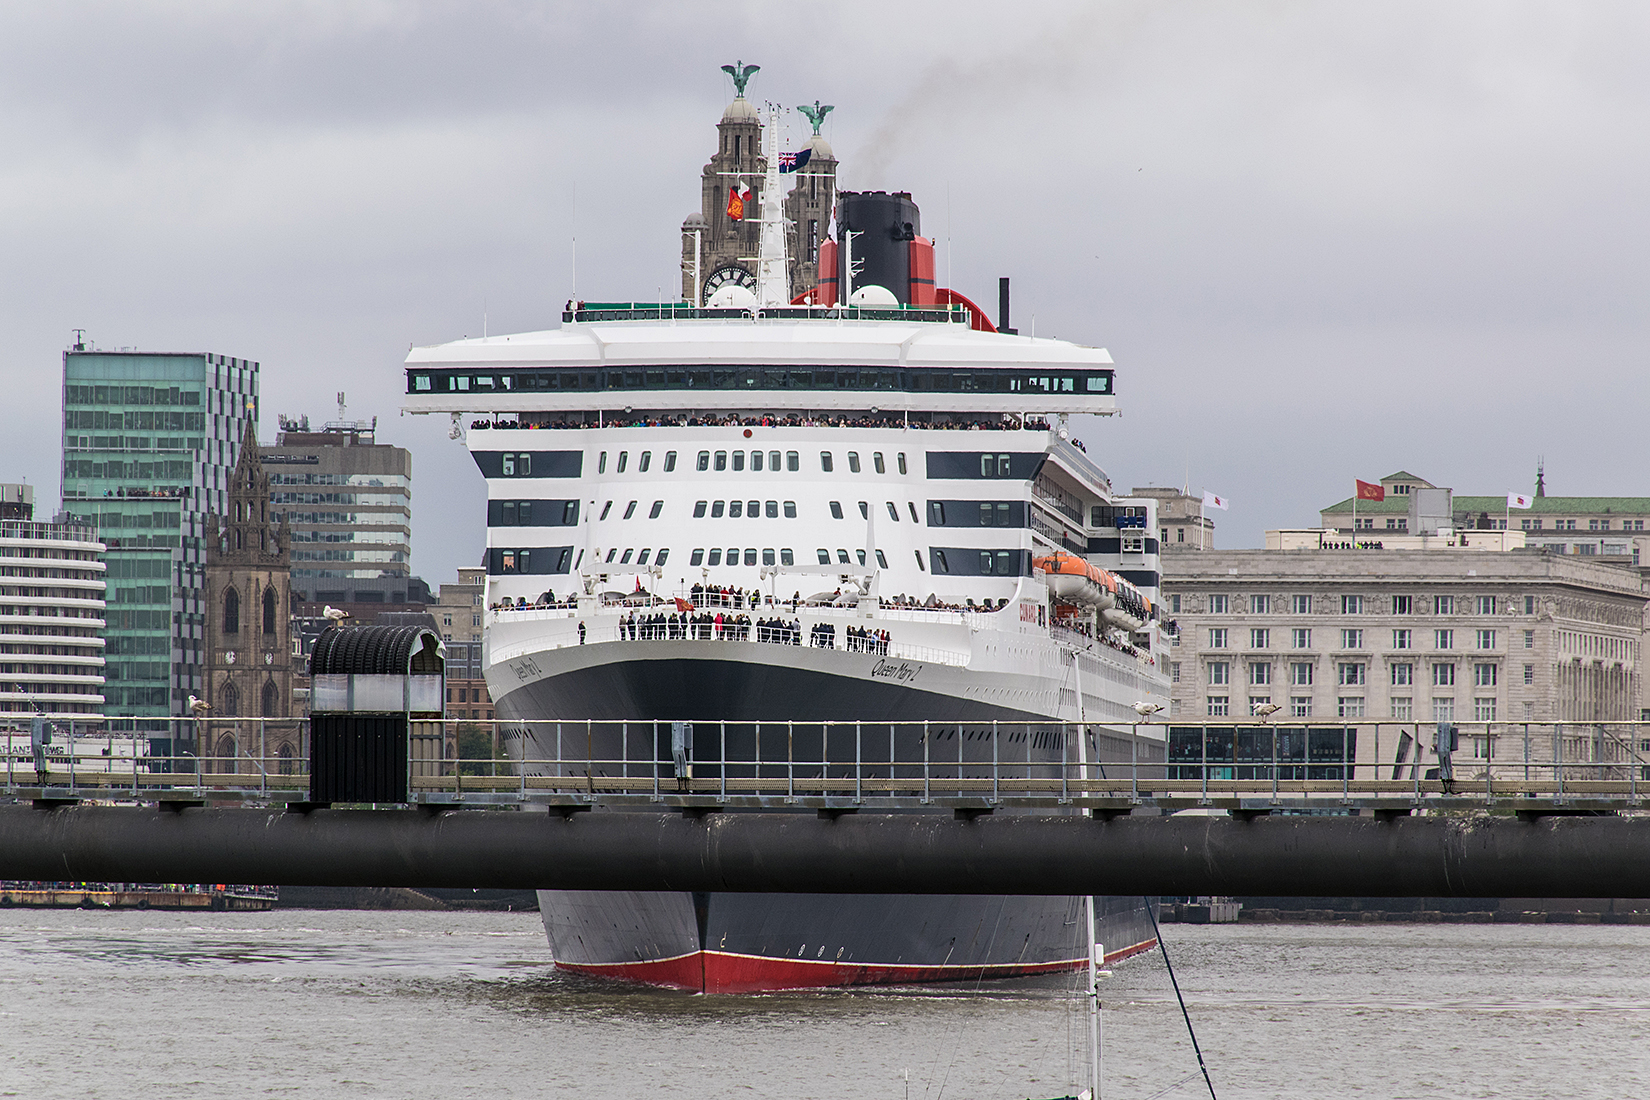 Queen Mary 2 in mid-manouver